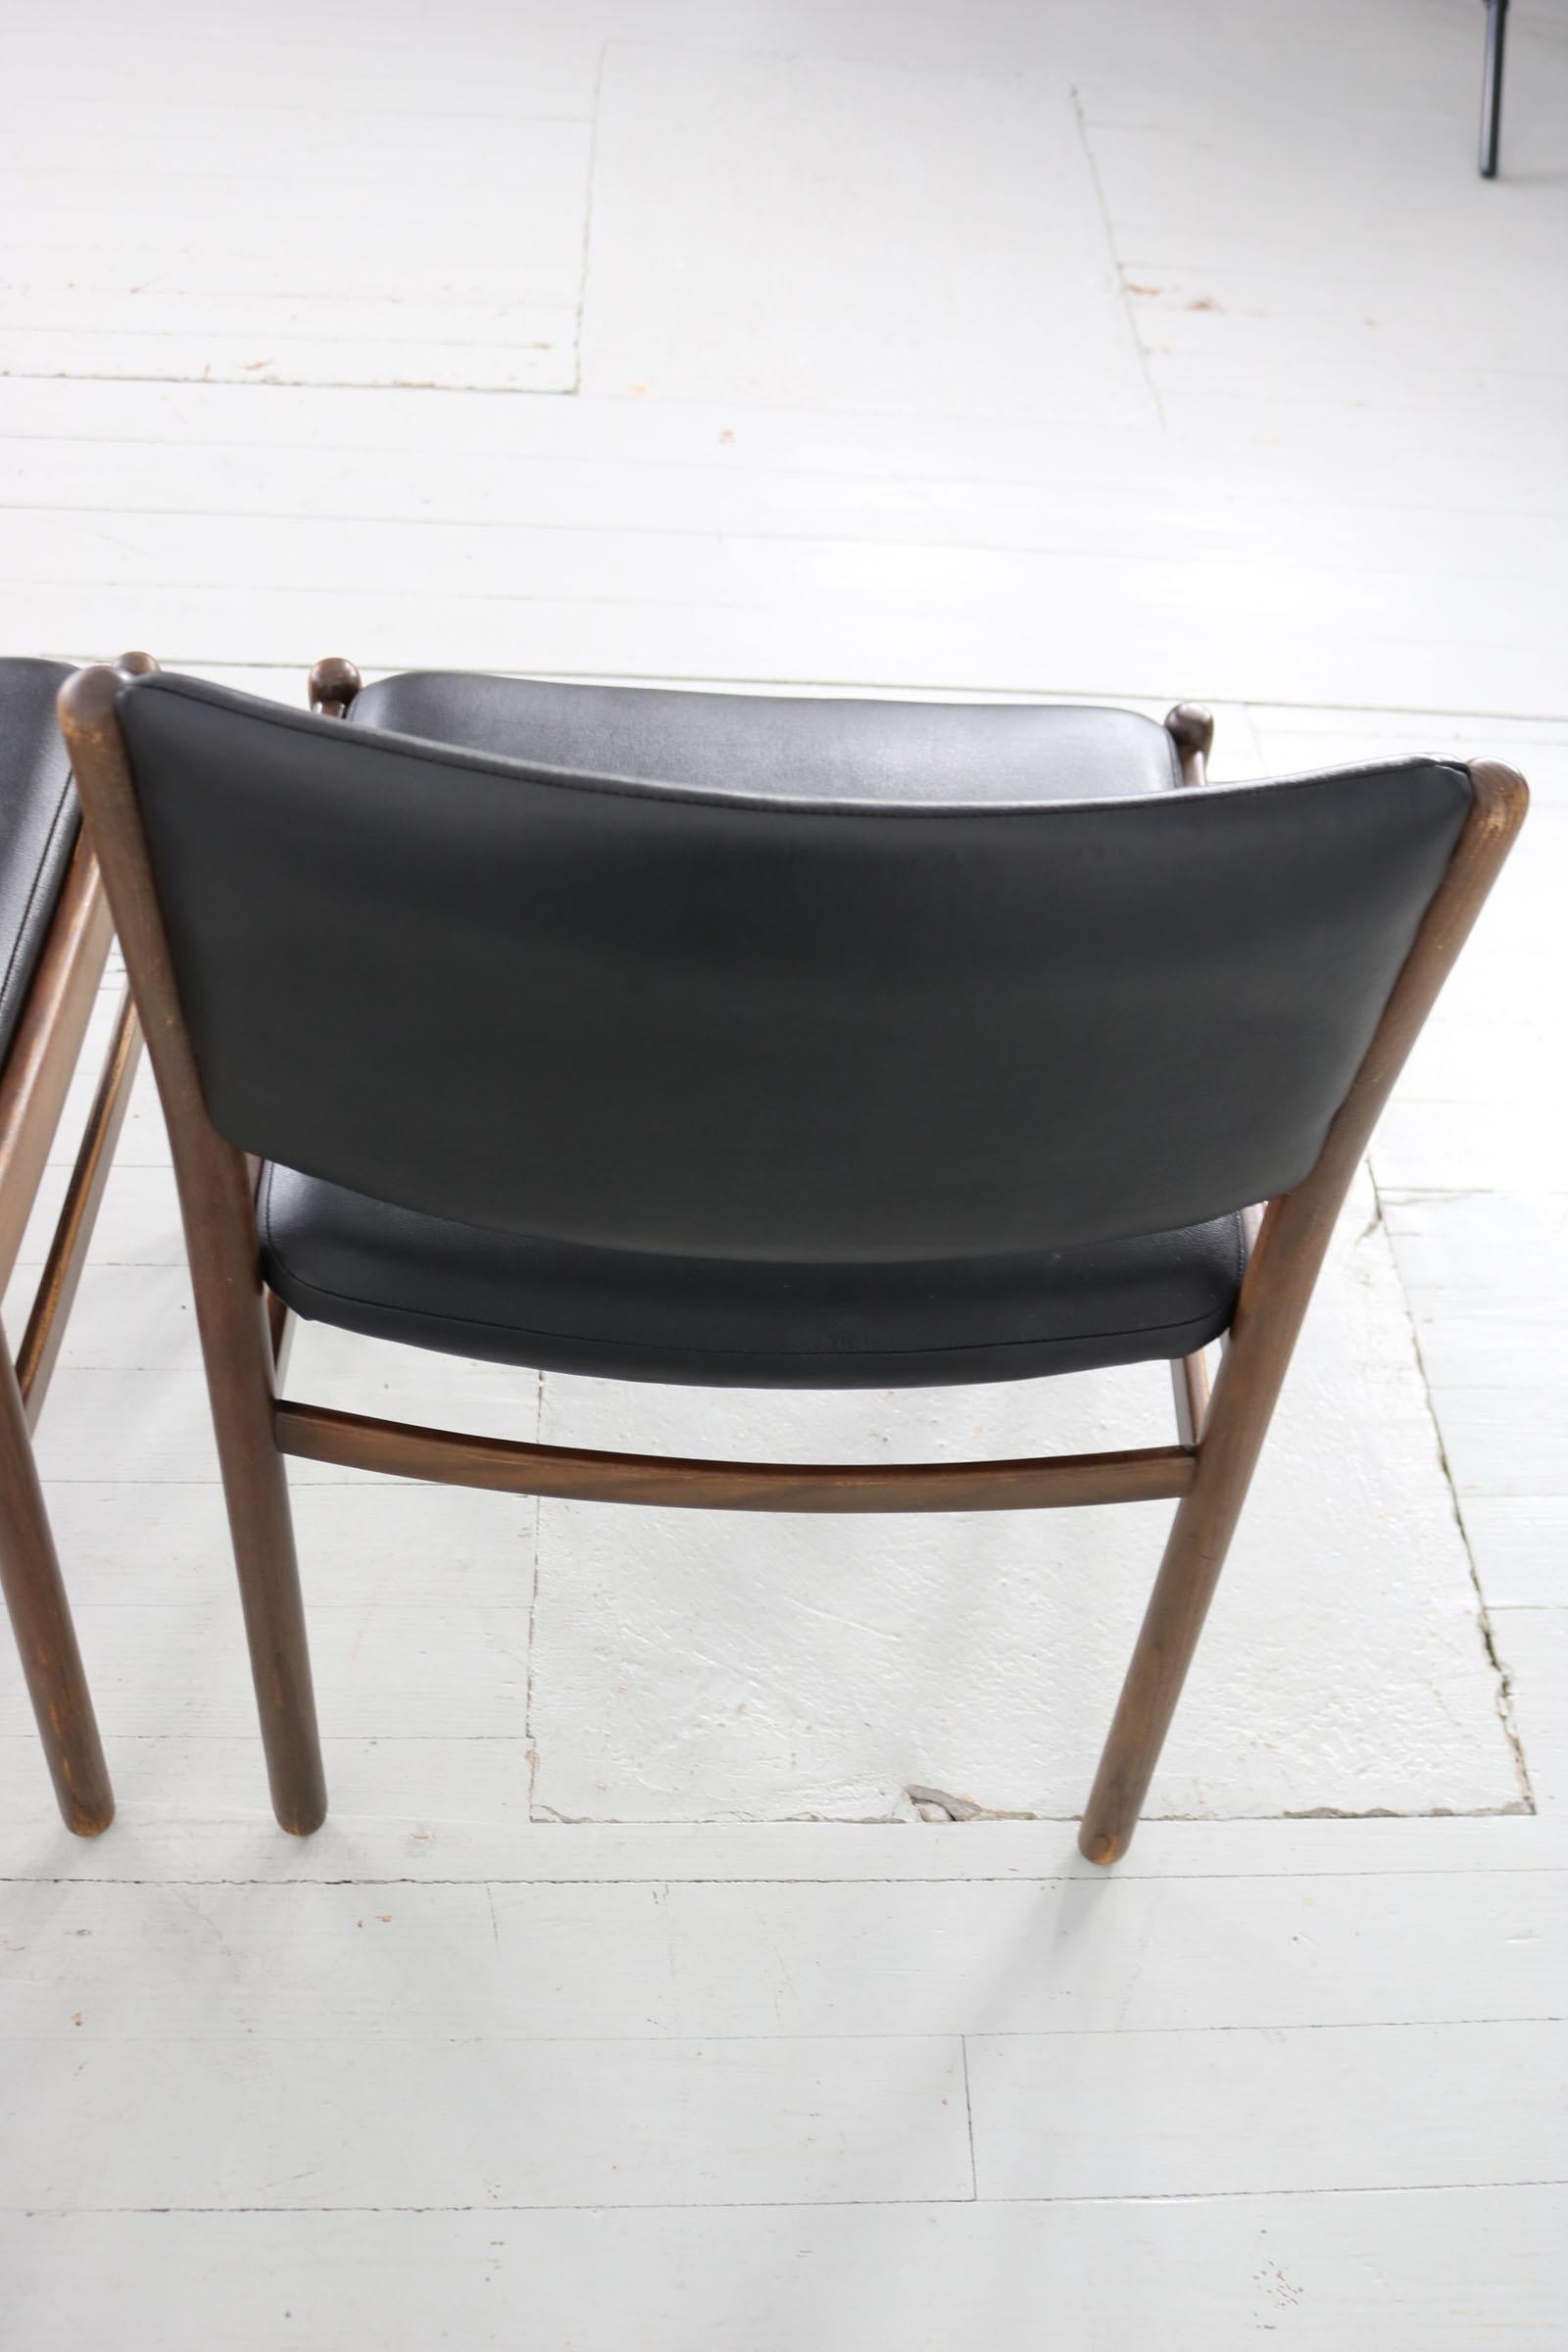 Set of Three Wooden Chairs with Black Leatherette Upholstery, Italy 60s For Sale 10